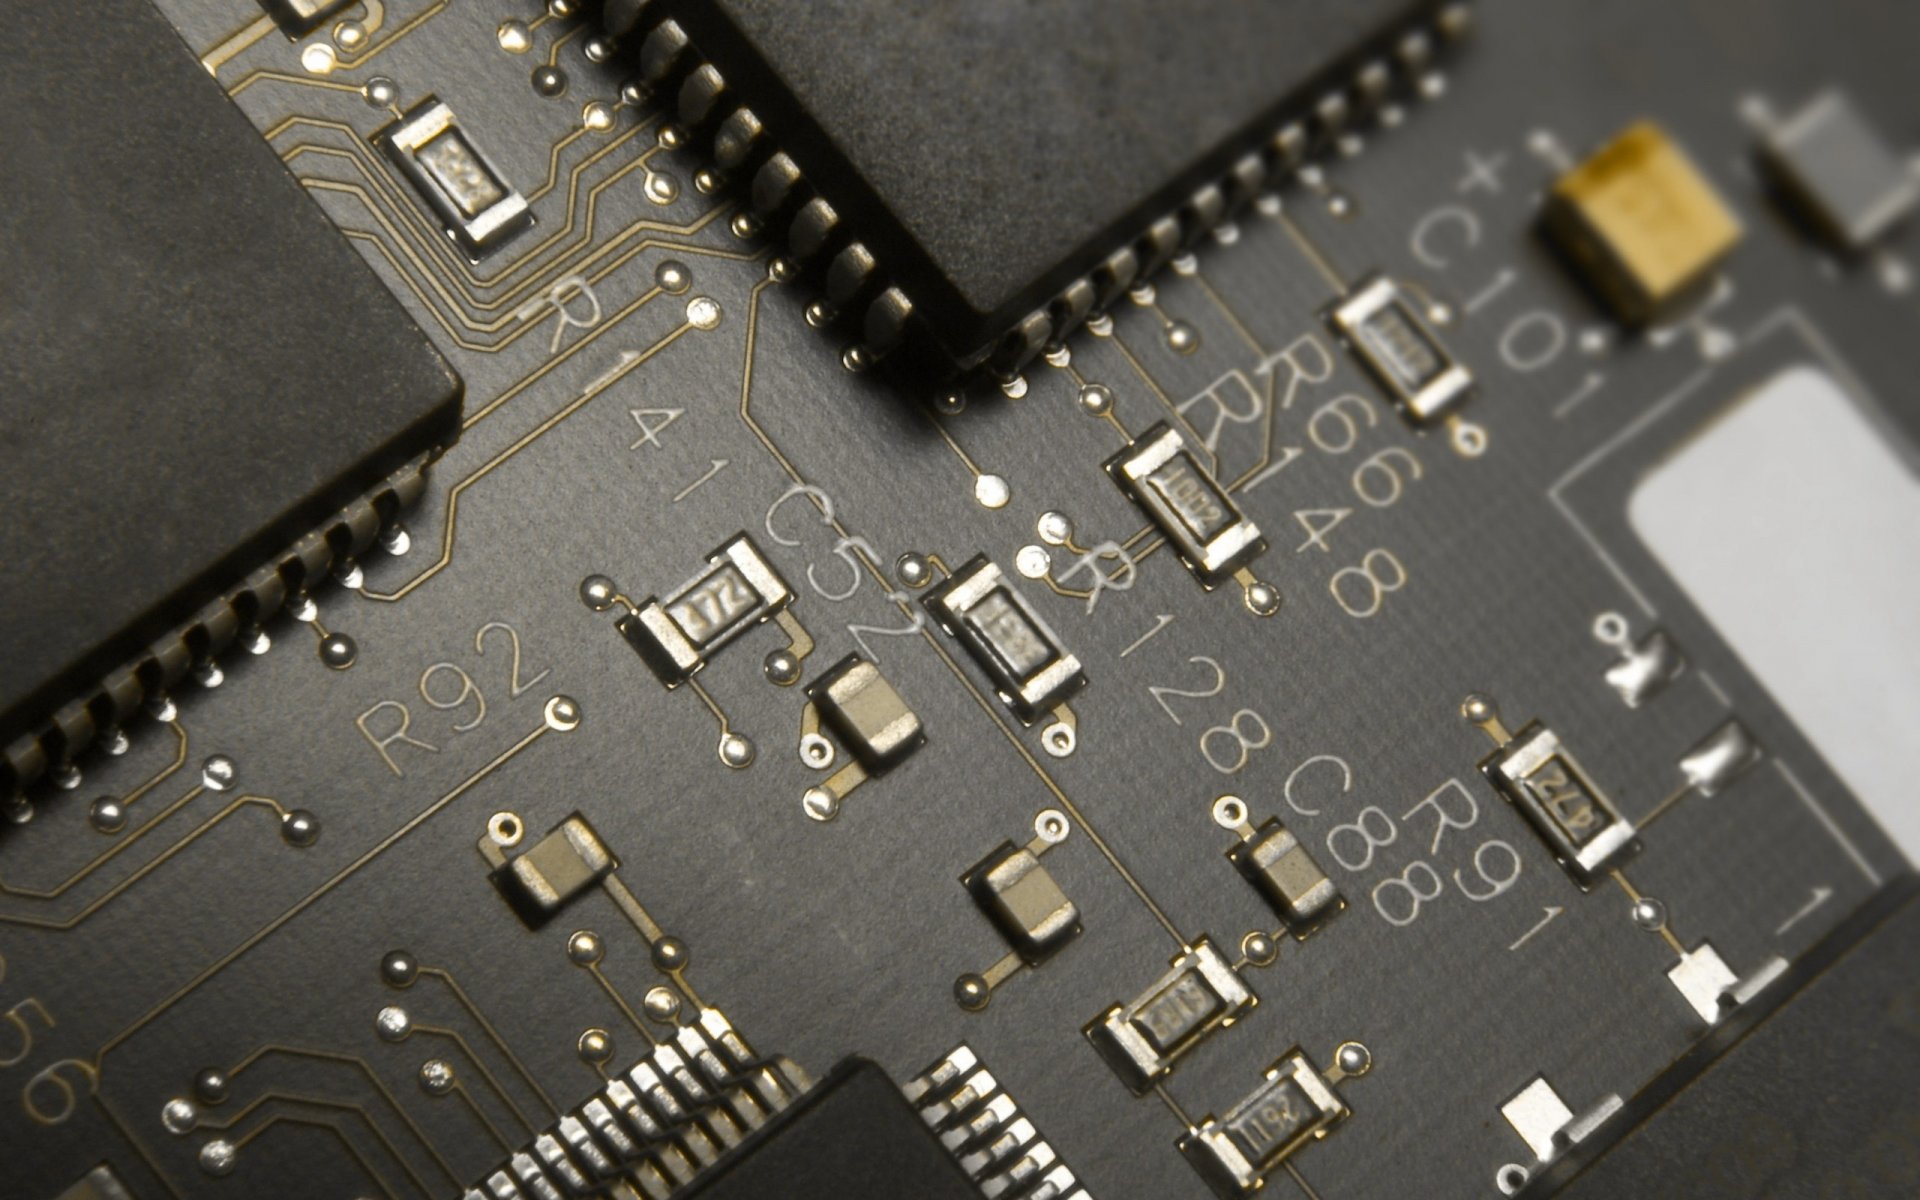 Tracks of a radio electronics board for a computer